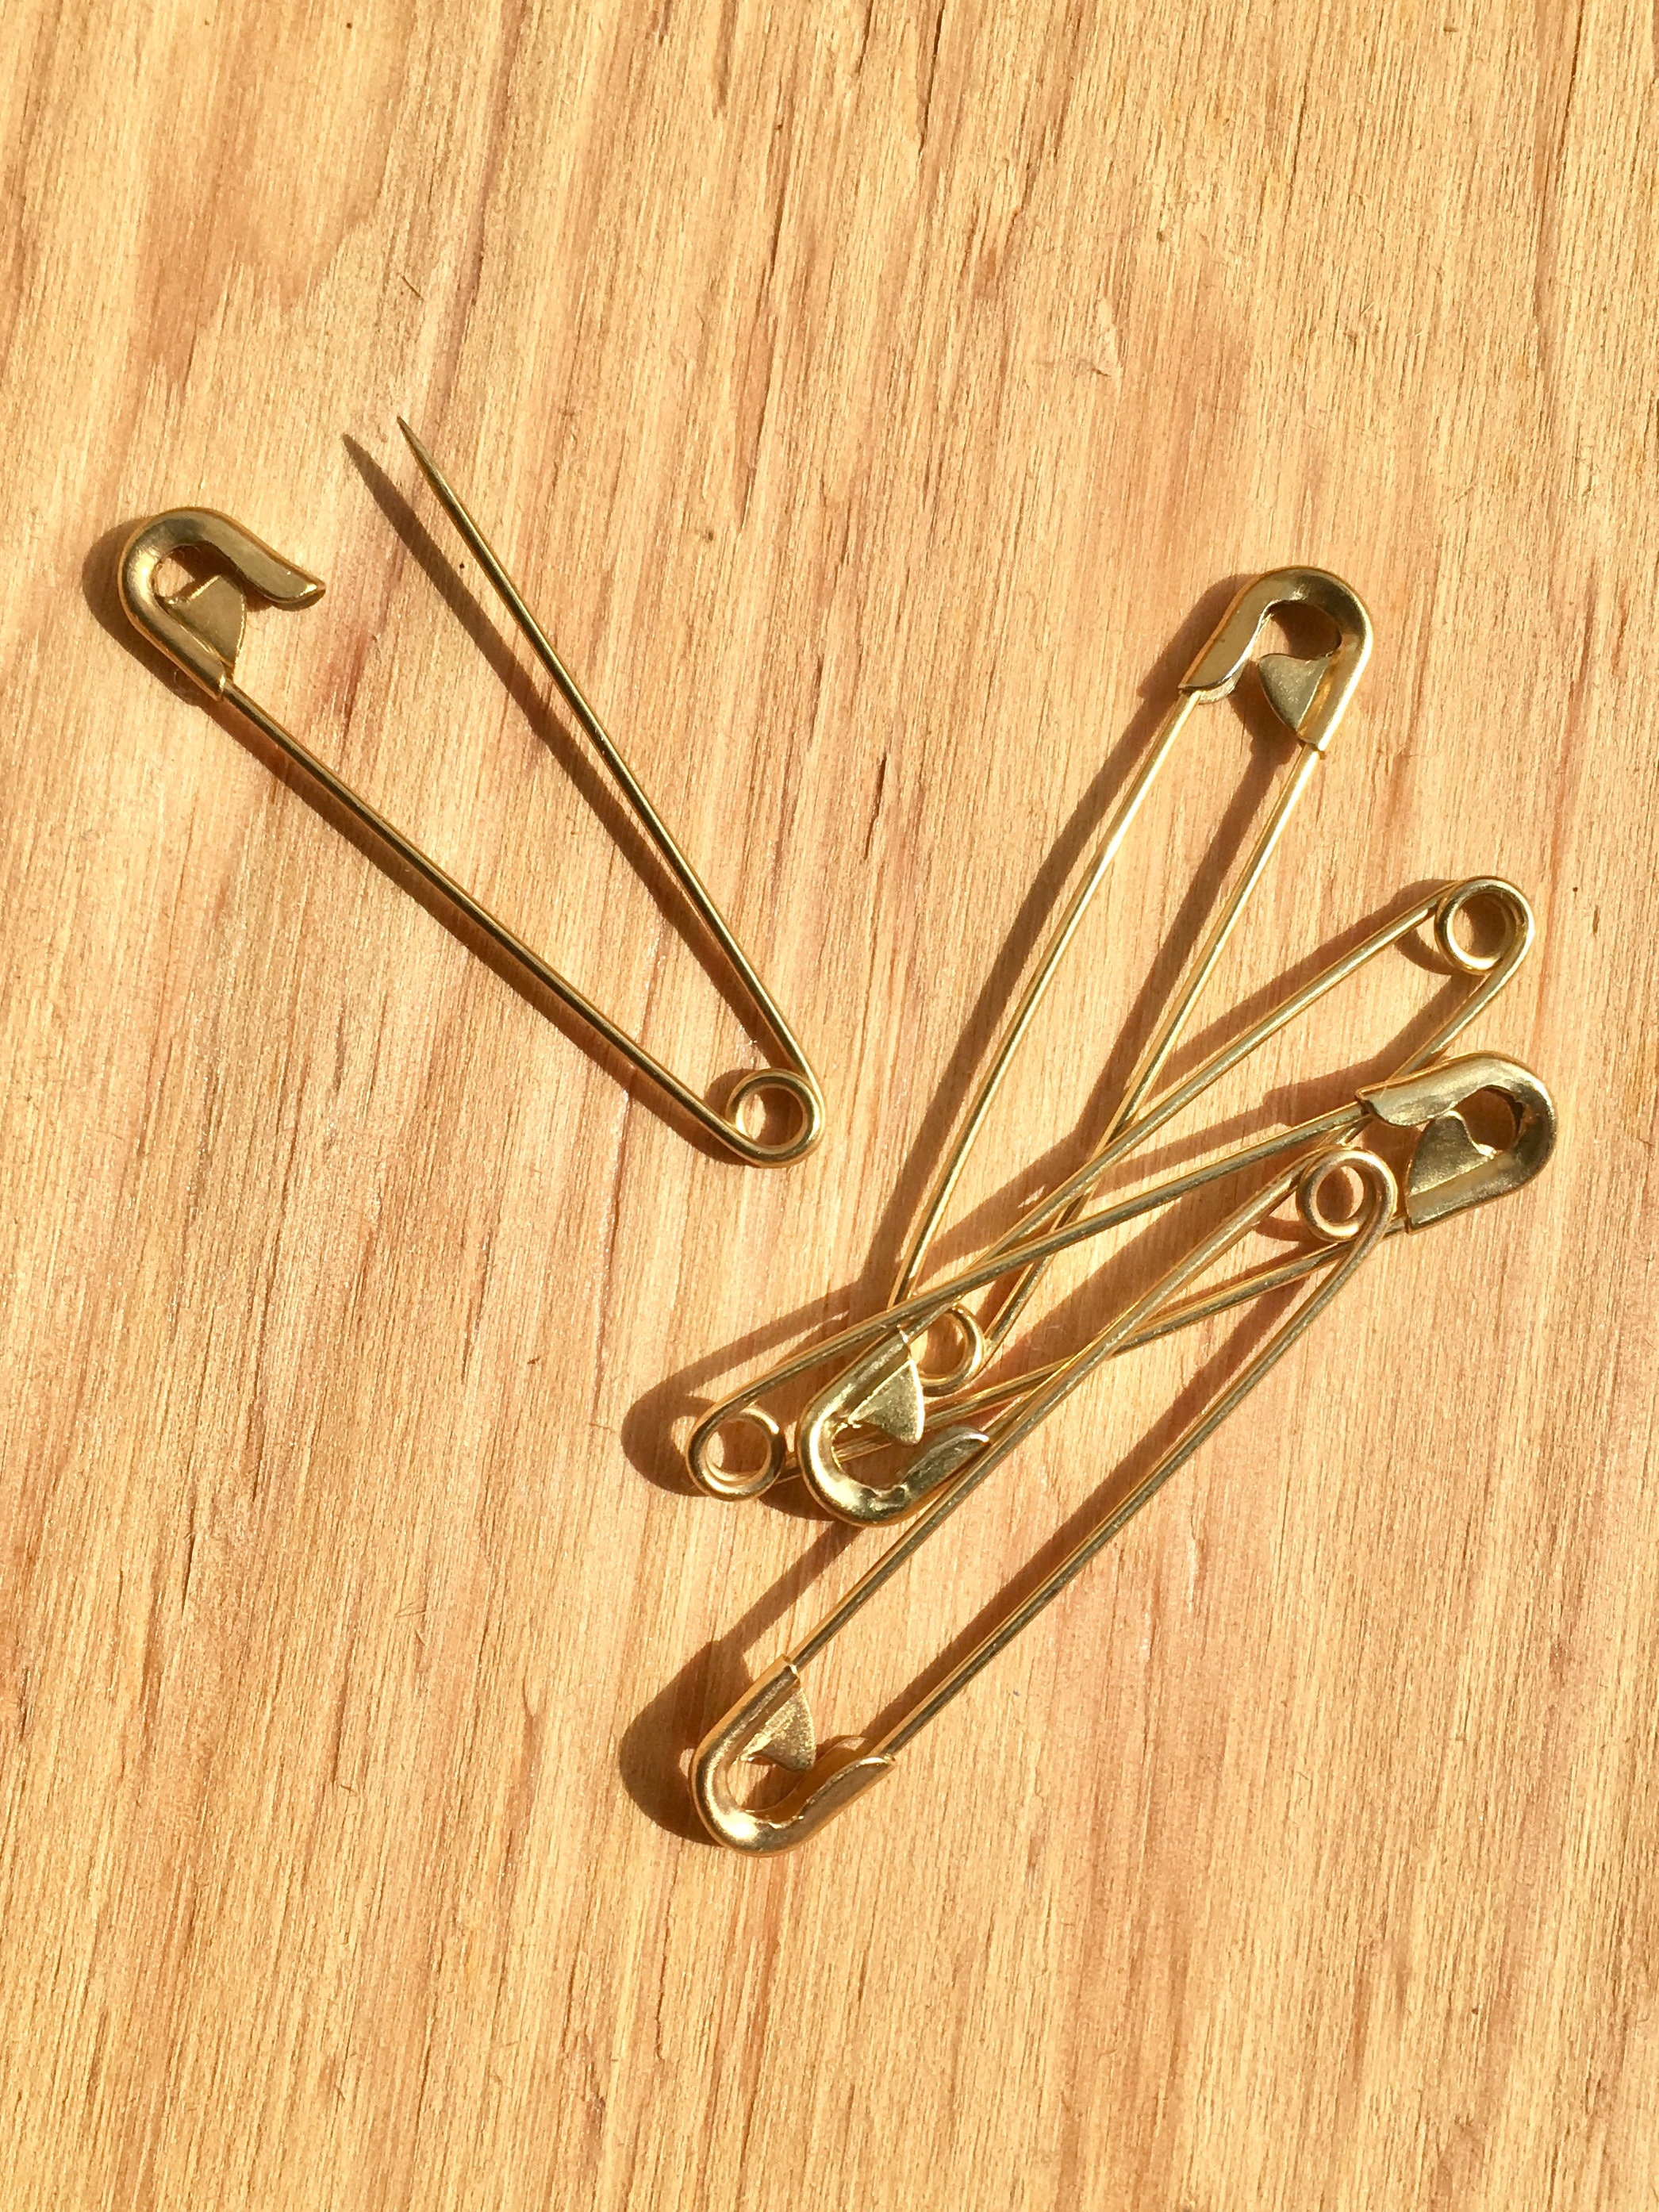 Antique Bronze Safety Pins Small Needles 31mm Brooch Kilt Pins Bulk Pins  Charm FOR Stitch Makers Sewing Jewelry Making-50/100pcs 